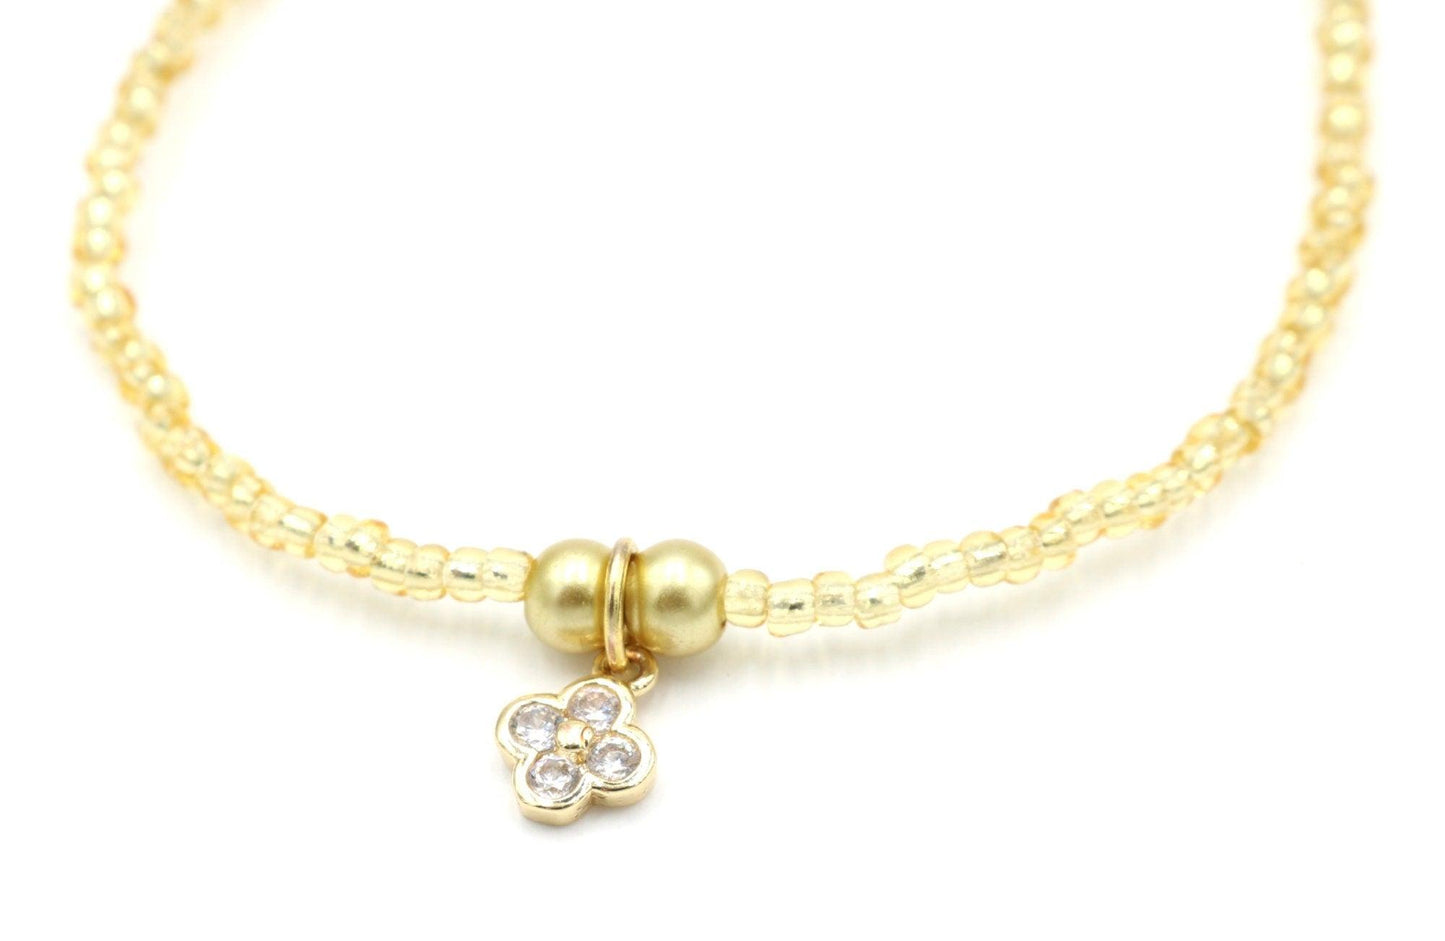 Stunning 14K Gold Filled Zicron Four-Leaf Clover Pendant 6mm Delicate Women’s Girl Stretch Bracelet with 1.5 mm Yellow Gold Toned Seed Beads - Monkeysmojo